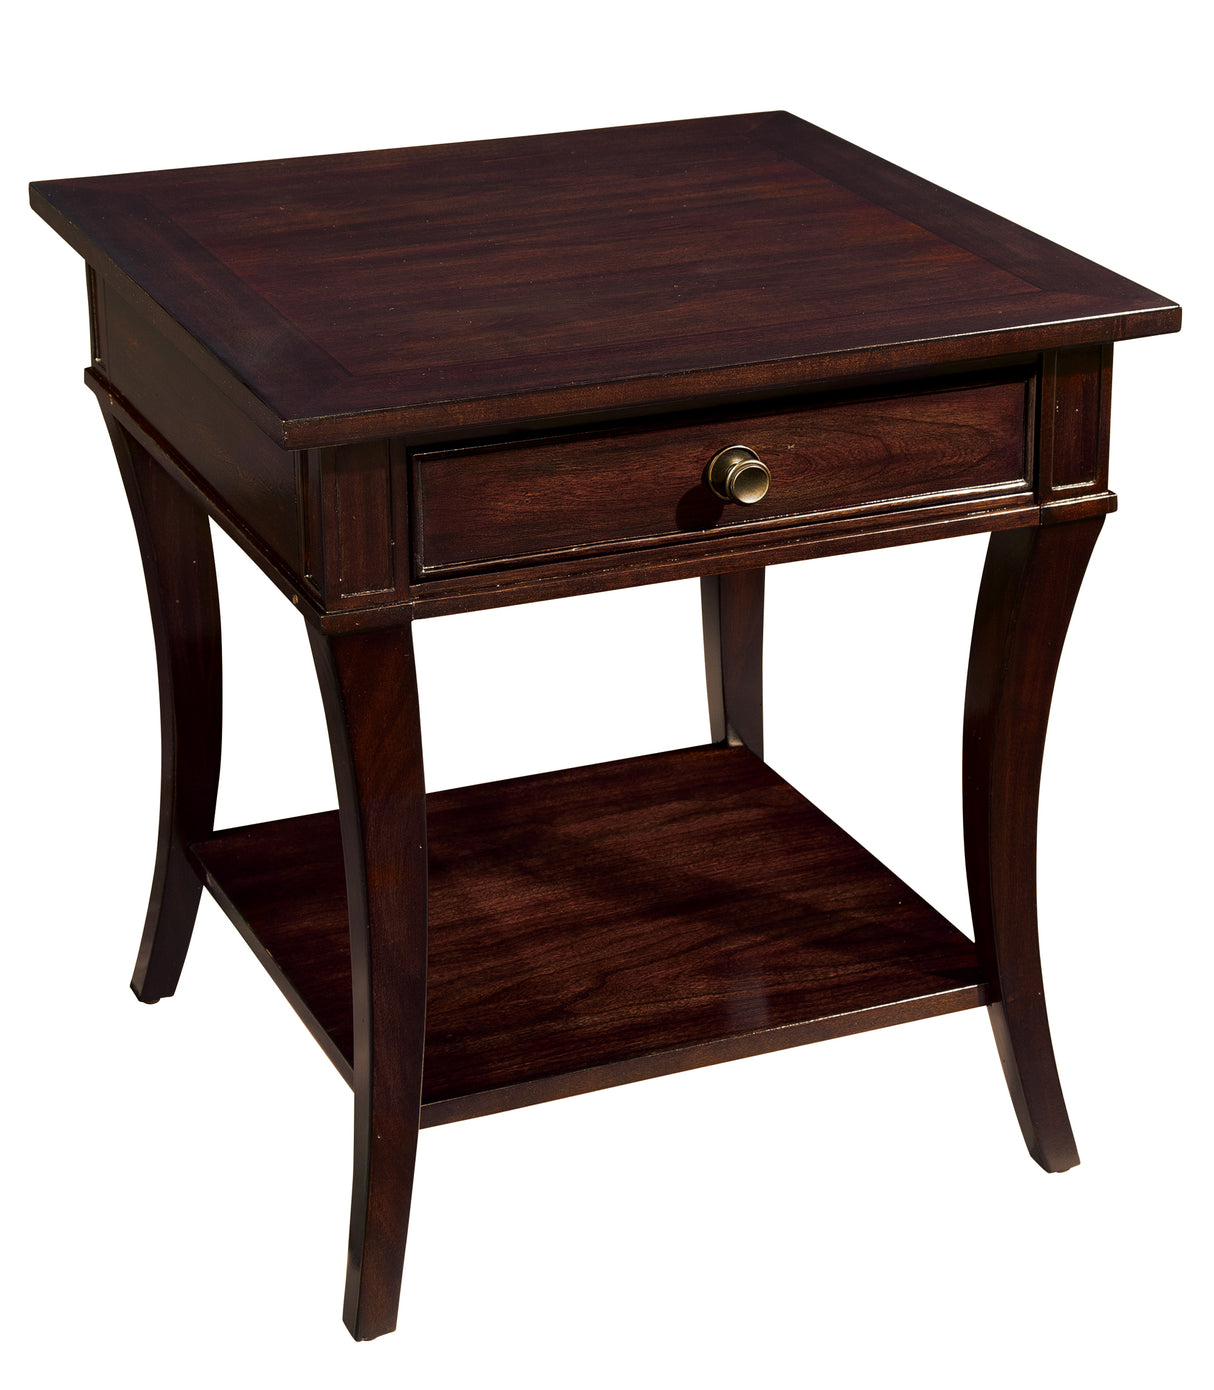 Hekman 23102 Accents 24in. x 24in. x 26.25in. End Table